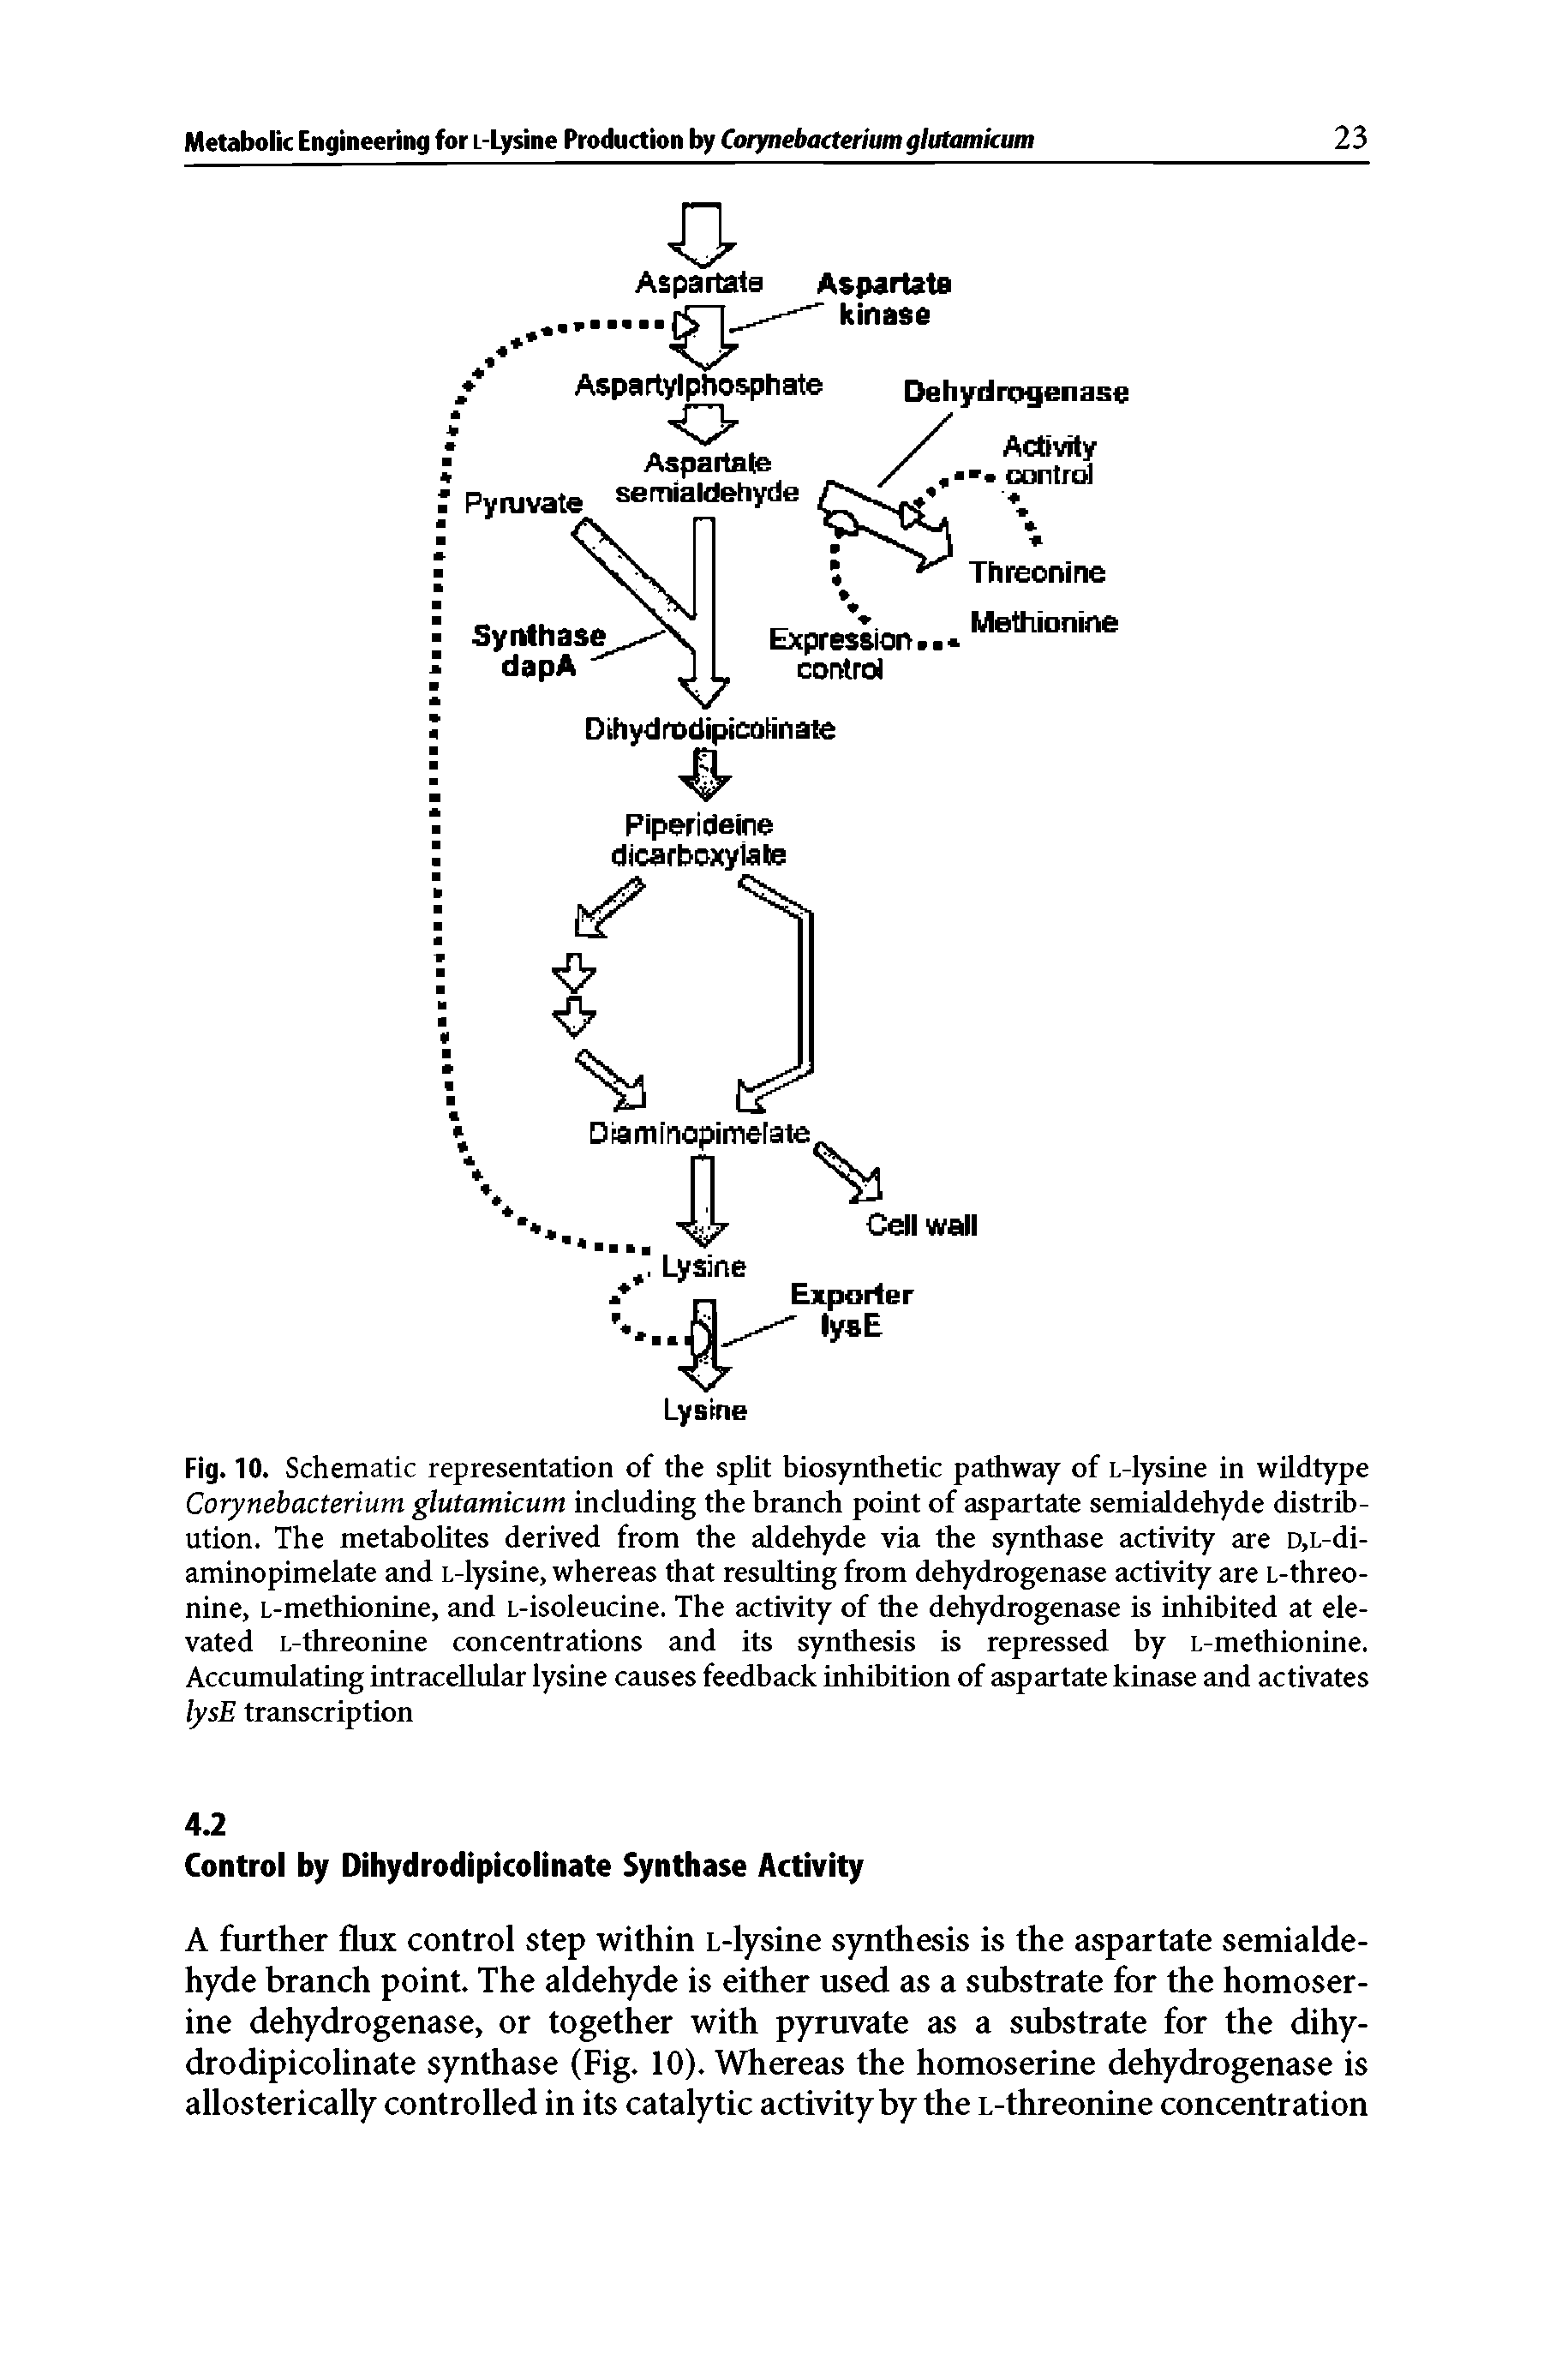 Fig. 10. Schematic representation of the split biosynthetic pathway of L-lysine in wildtype Corynebacterium glutamicum including the branch point of aspartate semialdehyde distribution. The metabolites derived from the aldehyde via the synthase activity are D,L-di-aminopimelate and L-lysine, whereas that resulting from dehydrogenase activity are L-threo-nine, L-methionine, and L-isoleucine. The activity of the dehydrogenase is inhibited at elevated L-threonine concentrations and its synthesis is repressed by L-methionine. Accumulating intracellular lysine causes feedback inhibition of aspartate kinase and activates lysE transcription...